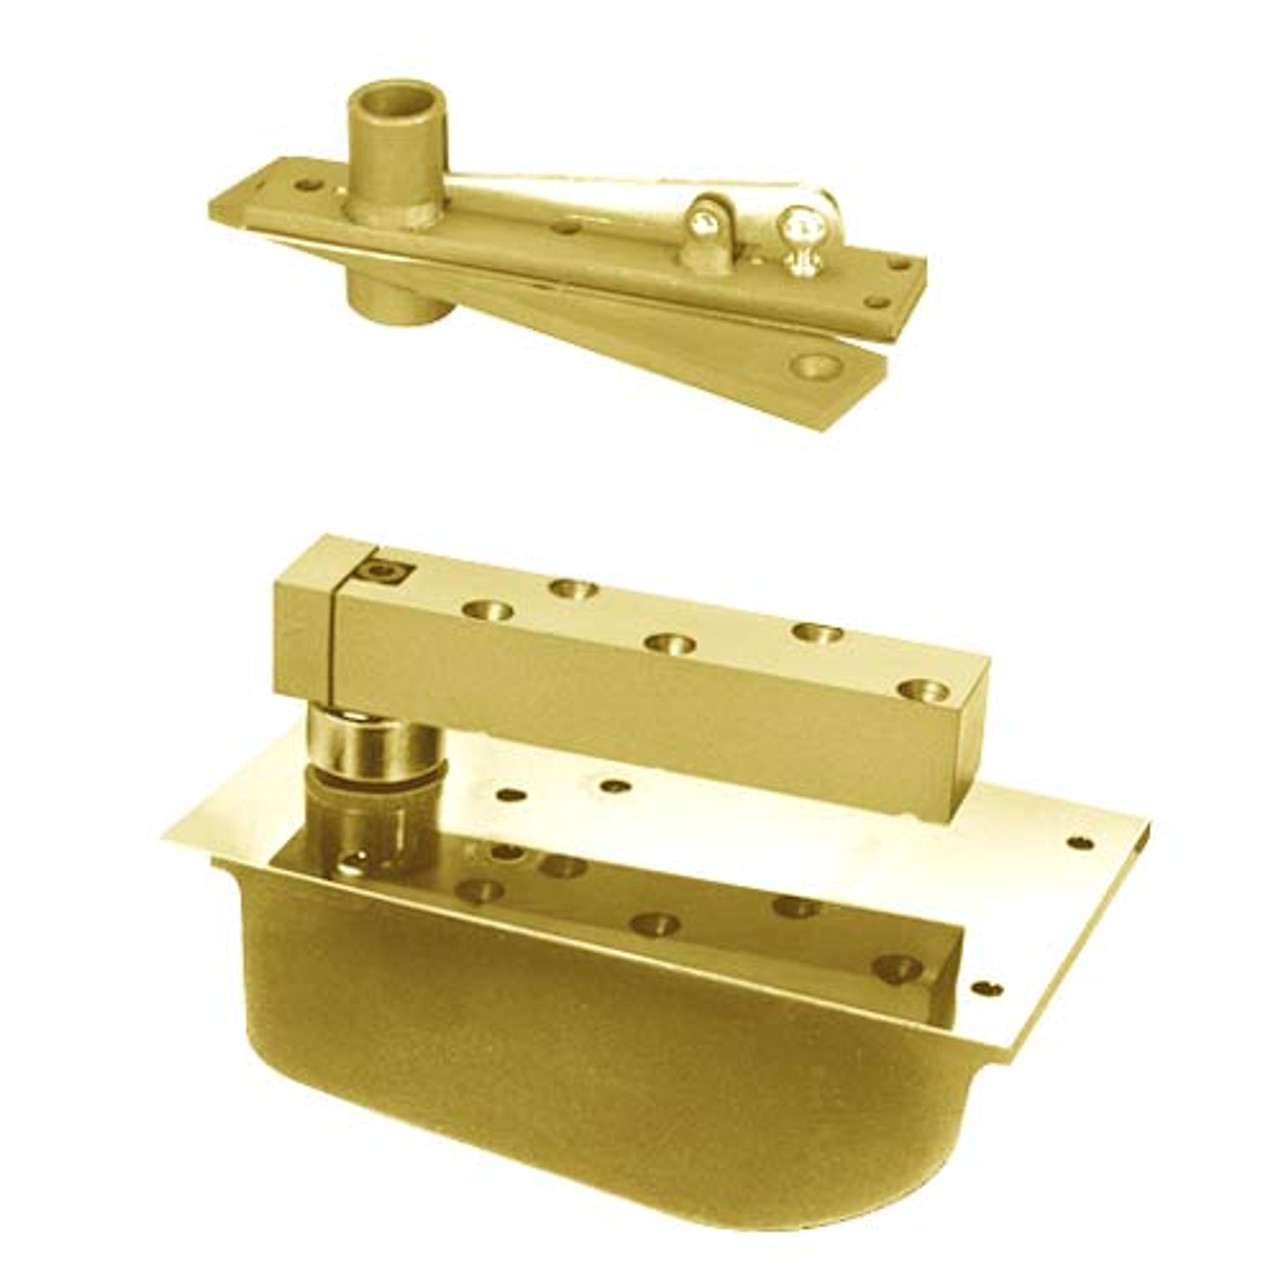 H28-85S-LTP-LH-606 Rixson 28 Series Heavy Duty Single Acting Center Hung Floor Closer in Satin Brass Finish